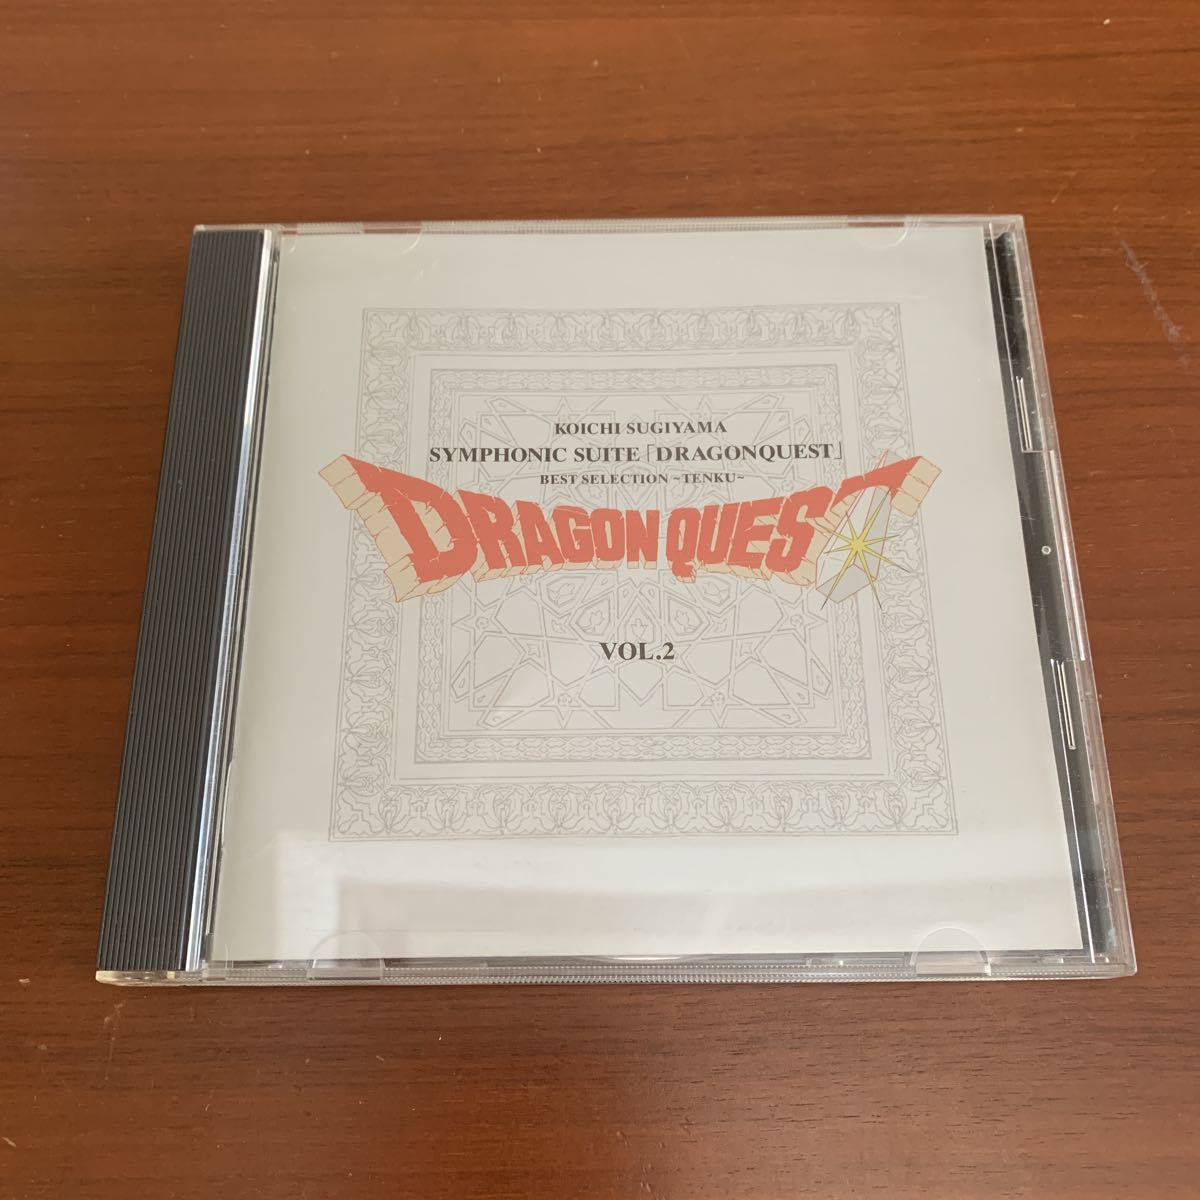  reverberation Kumikyoku [ Dragon Quest ] the best * selection ~ heaven empty compilation /........CD